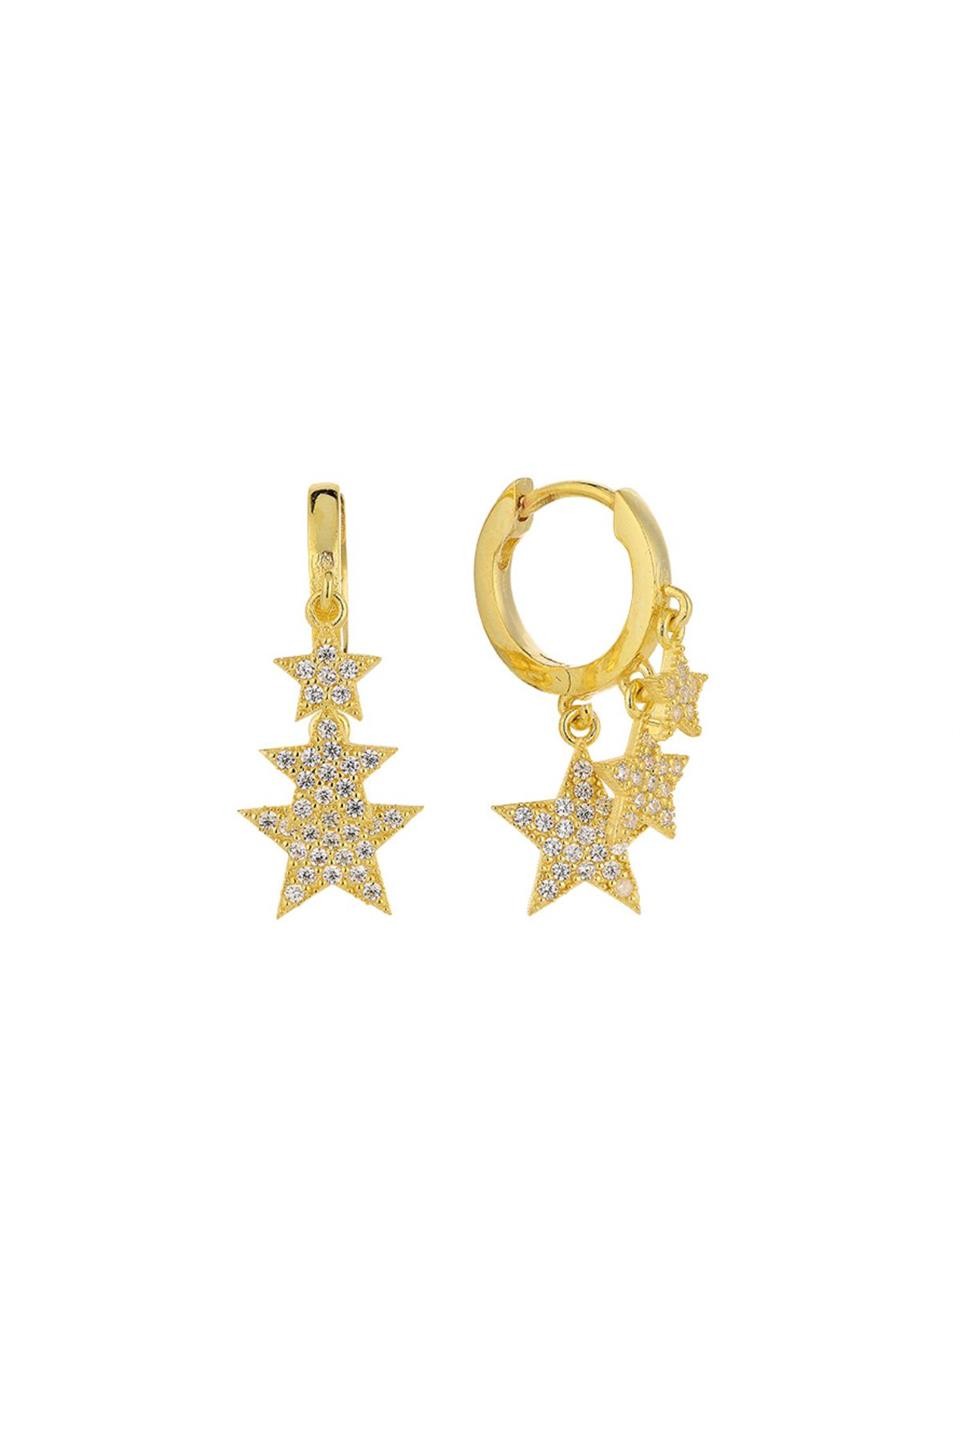 3 star earrings with stone